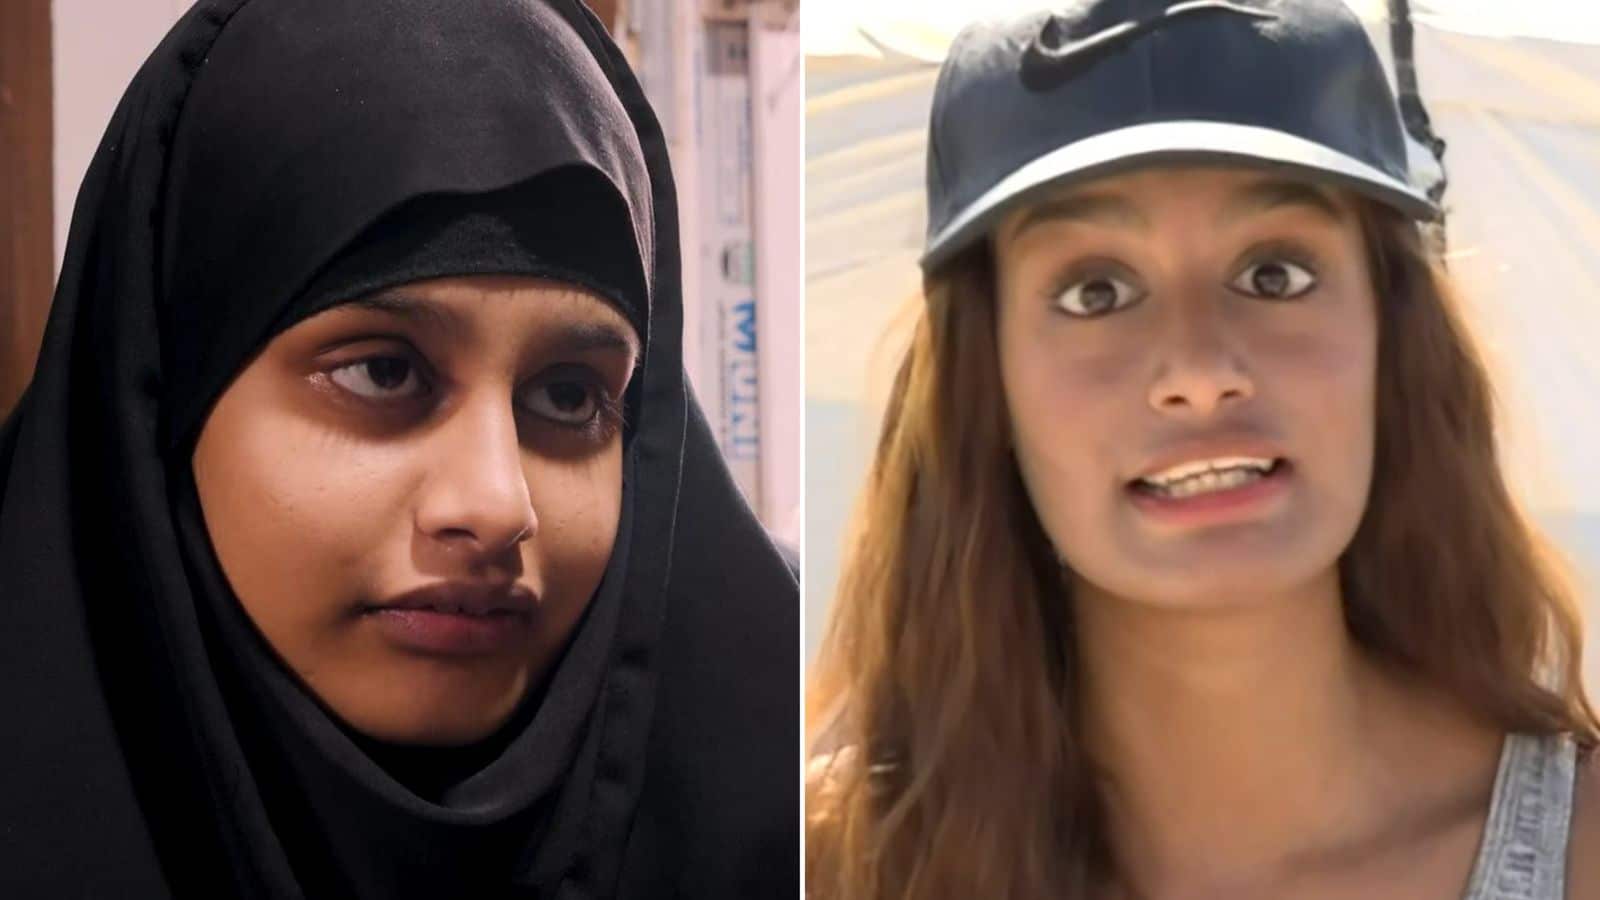 ISIS bride Shamima Begum seen in Western outfit